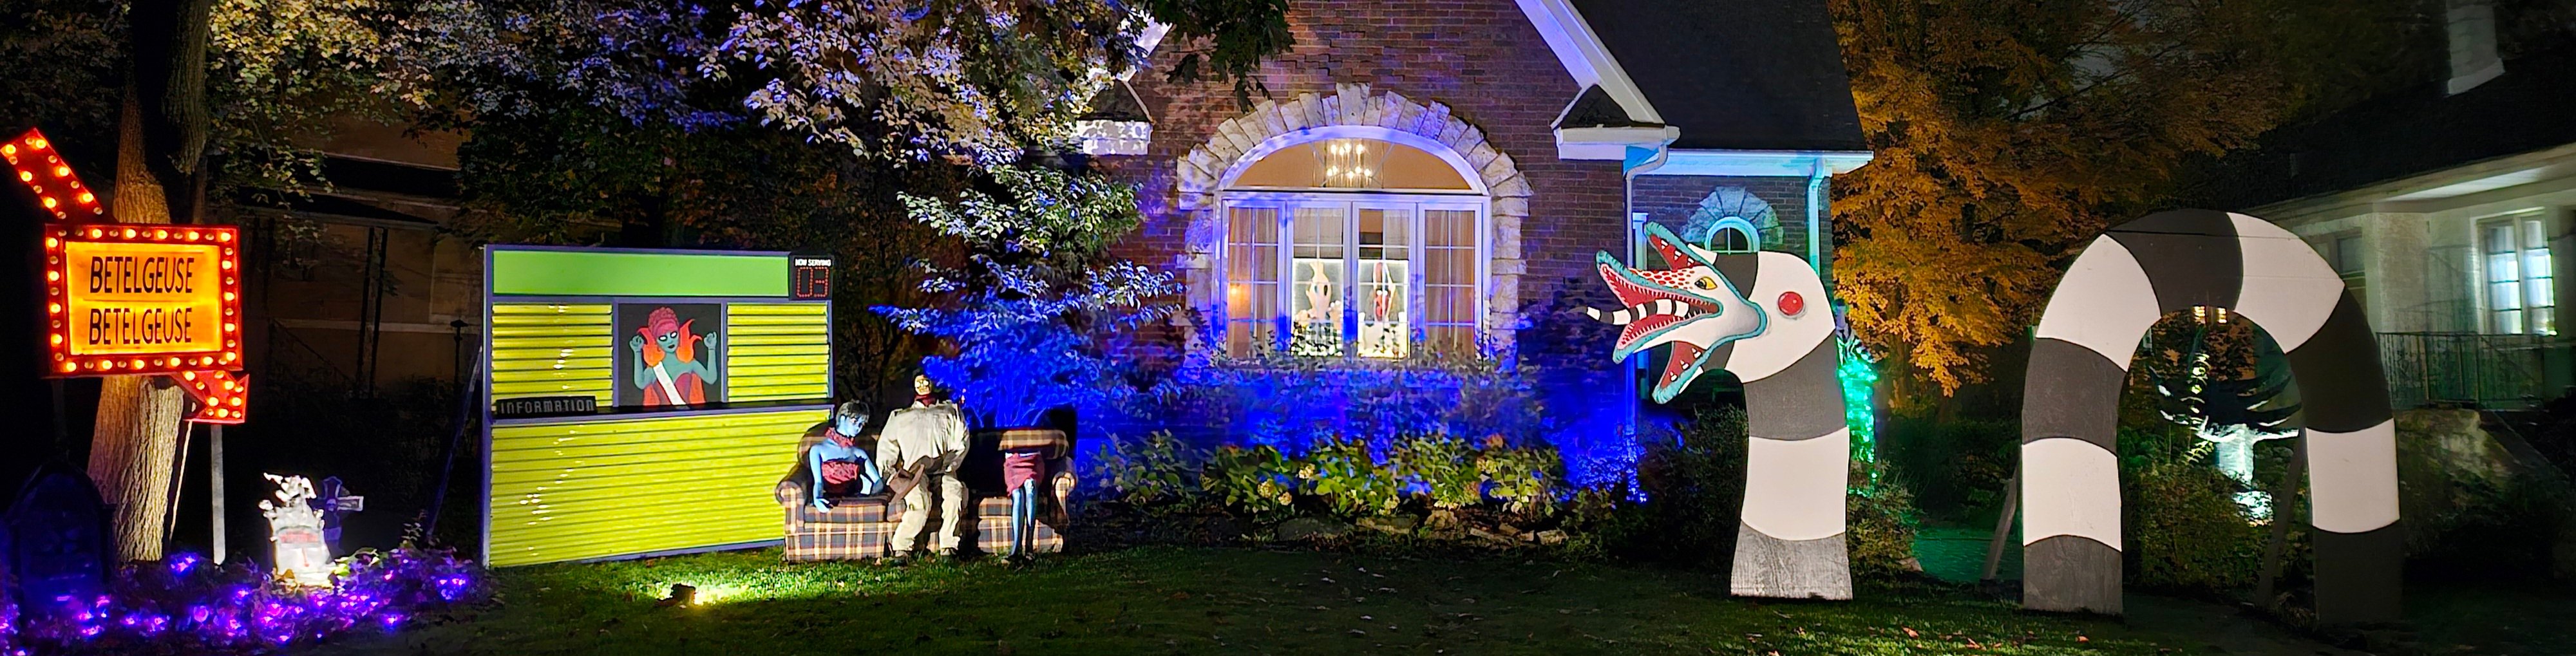 The Best Decorated Houses for Halloween 2023: Brookfield, La Grange Park, and Riverside